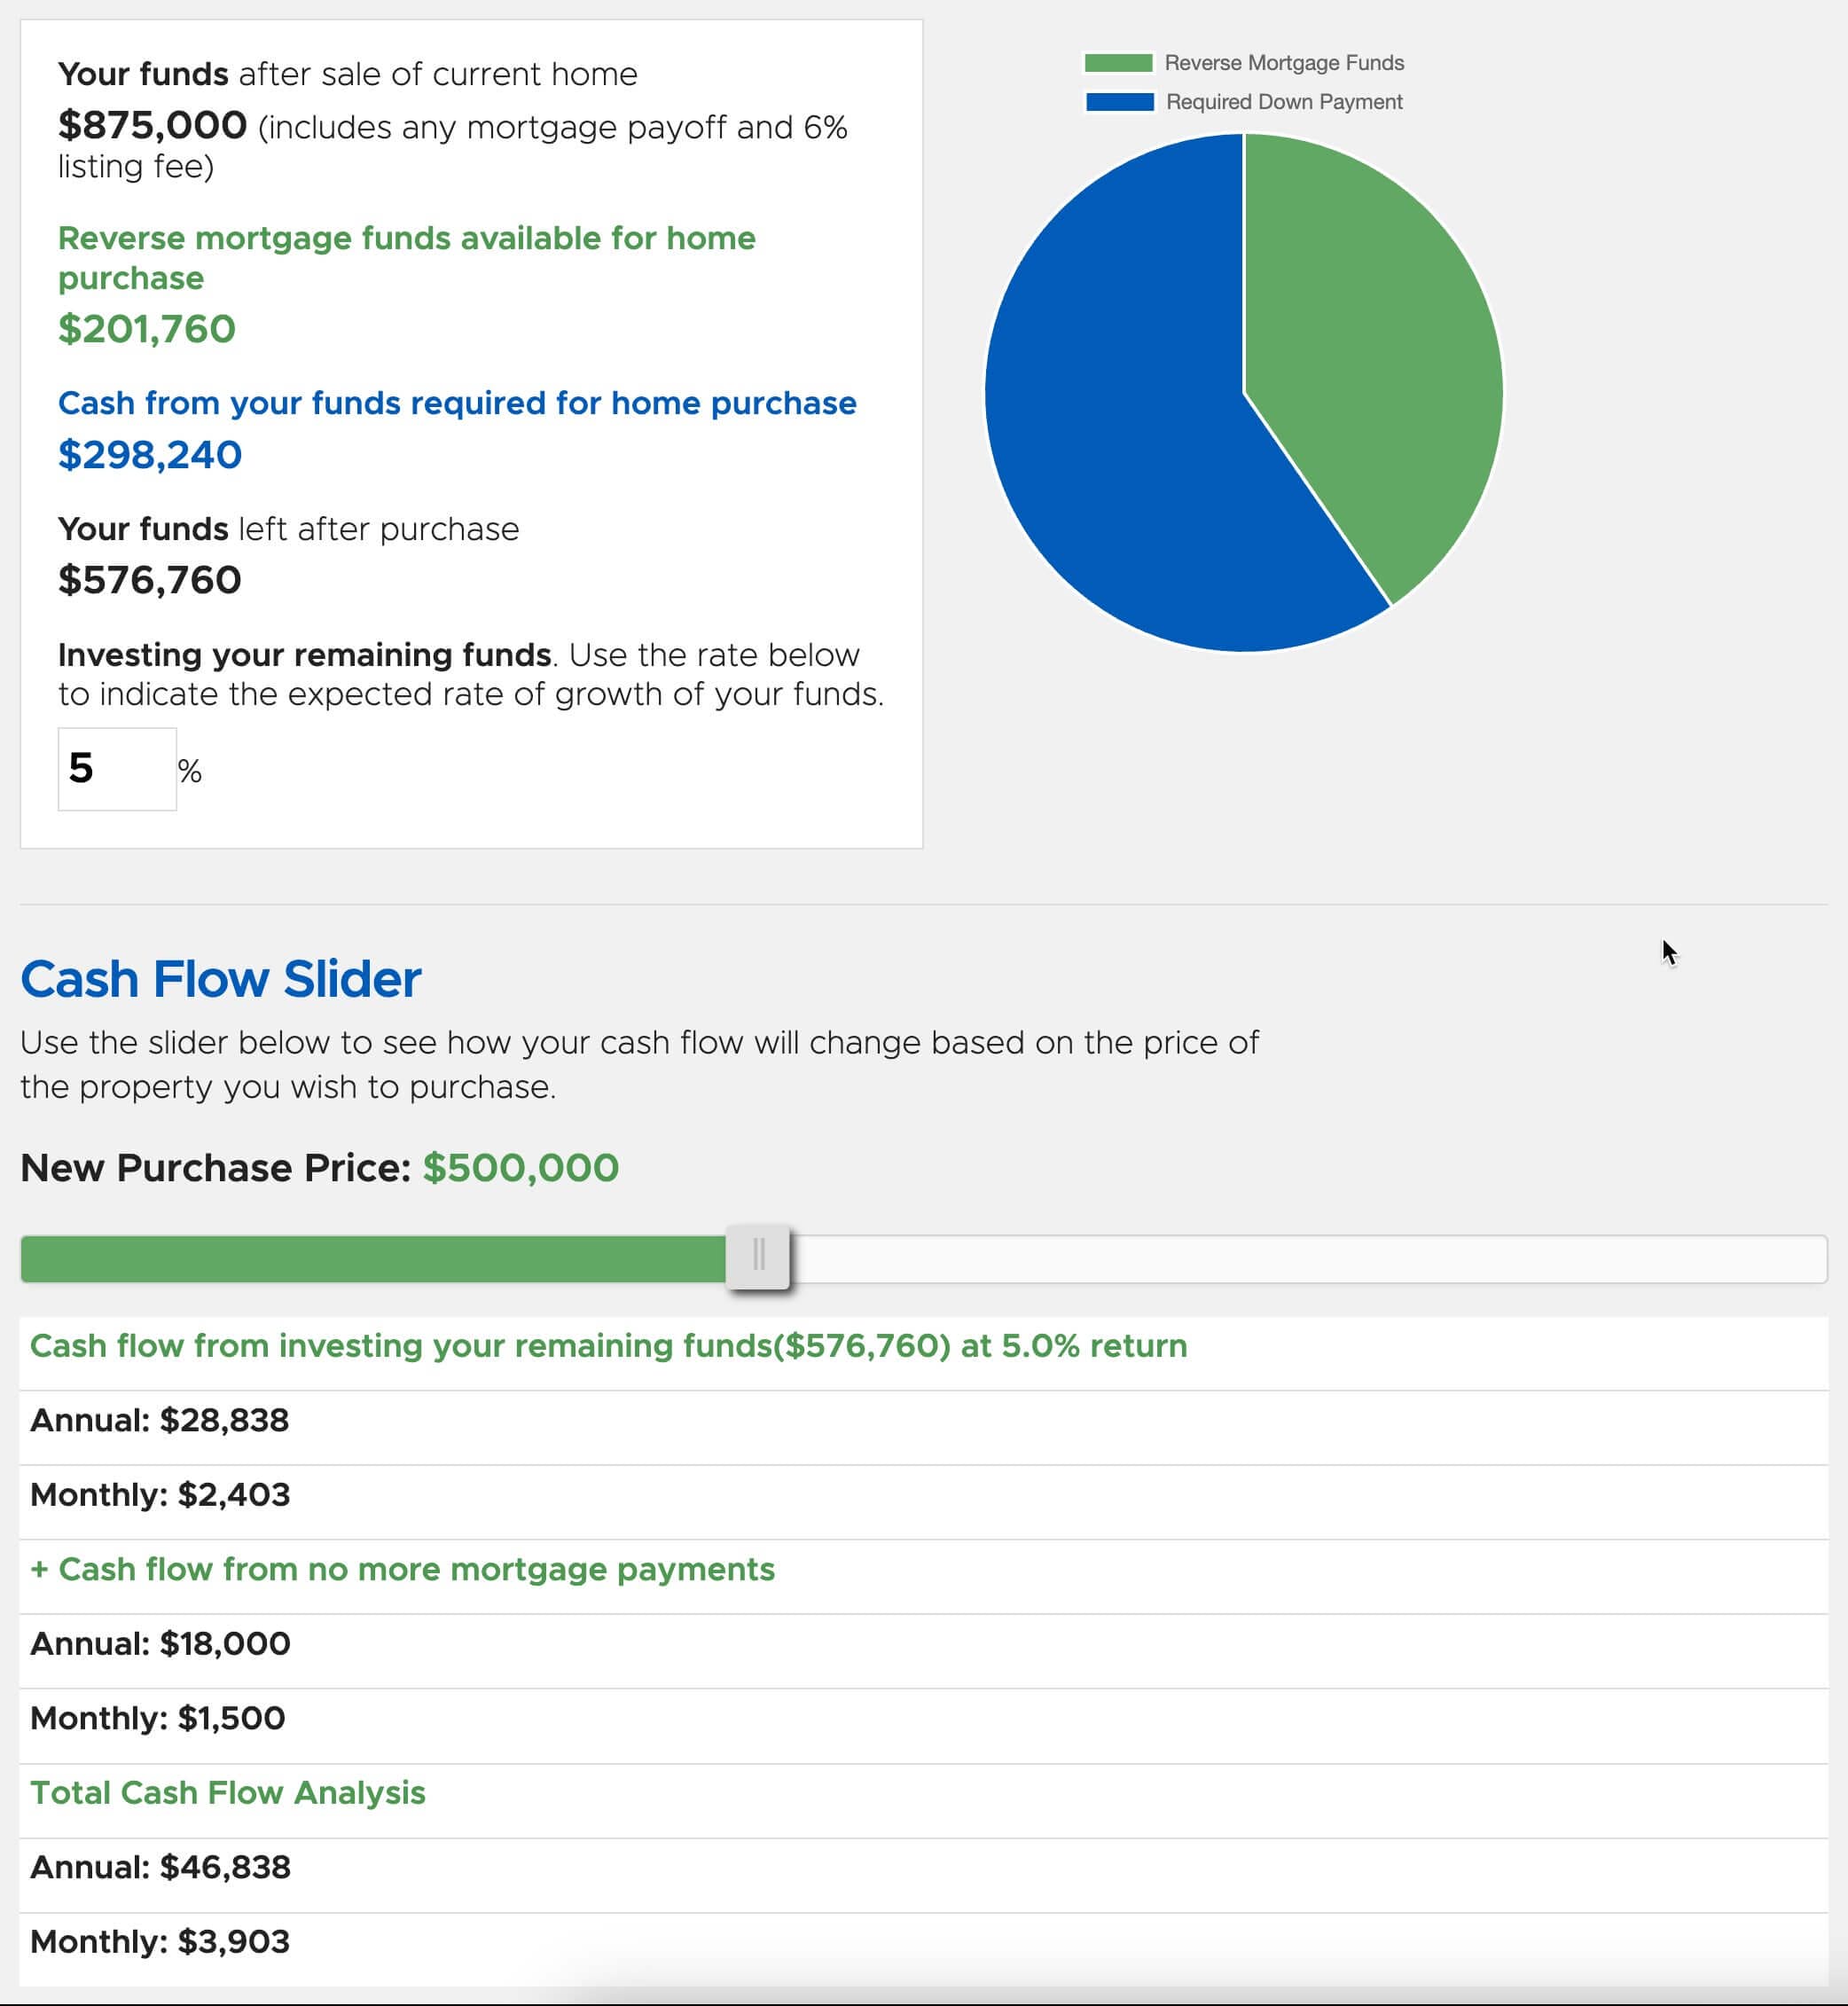 Cash flow illustration with pie chart downsizing to $500k sales price 